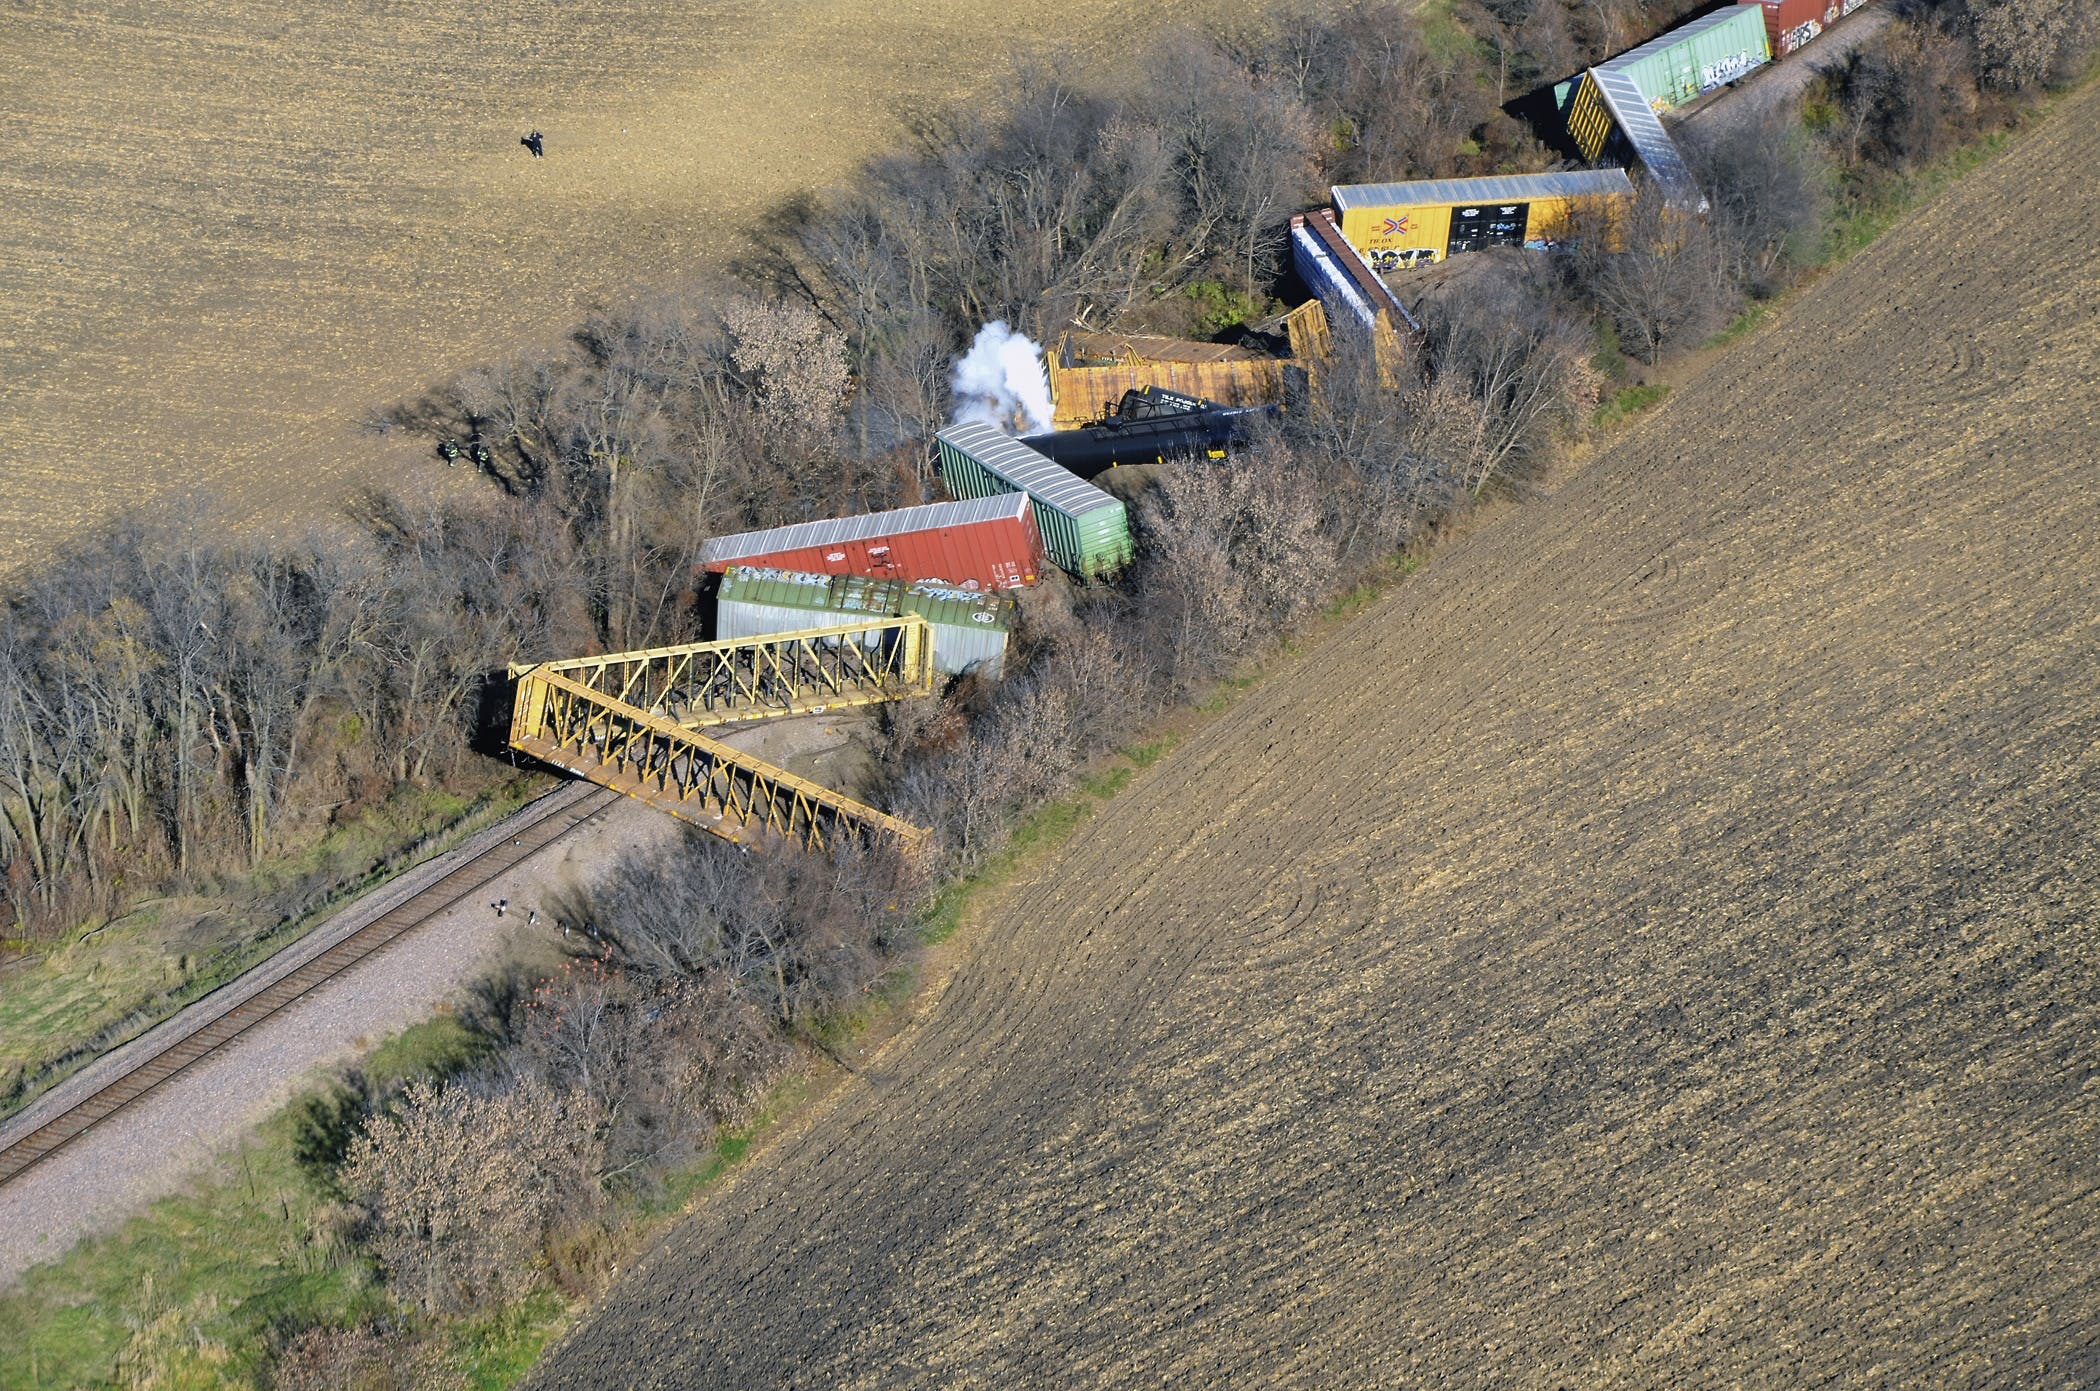 Evacuation over after train derailed in southern Minnesota town